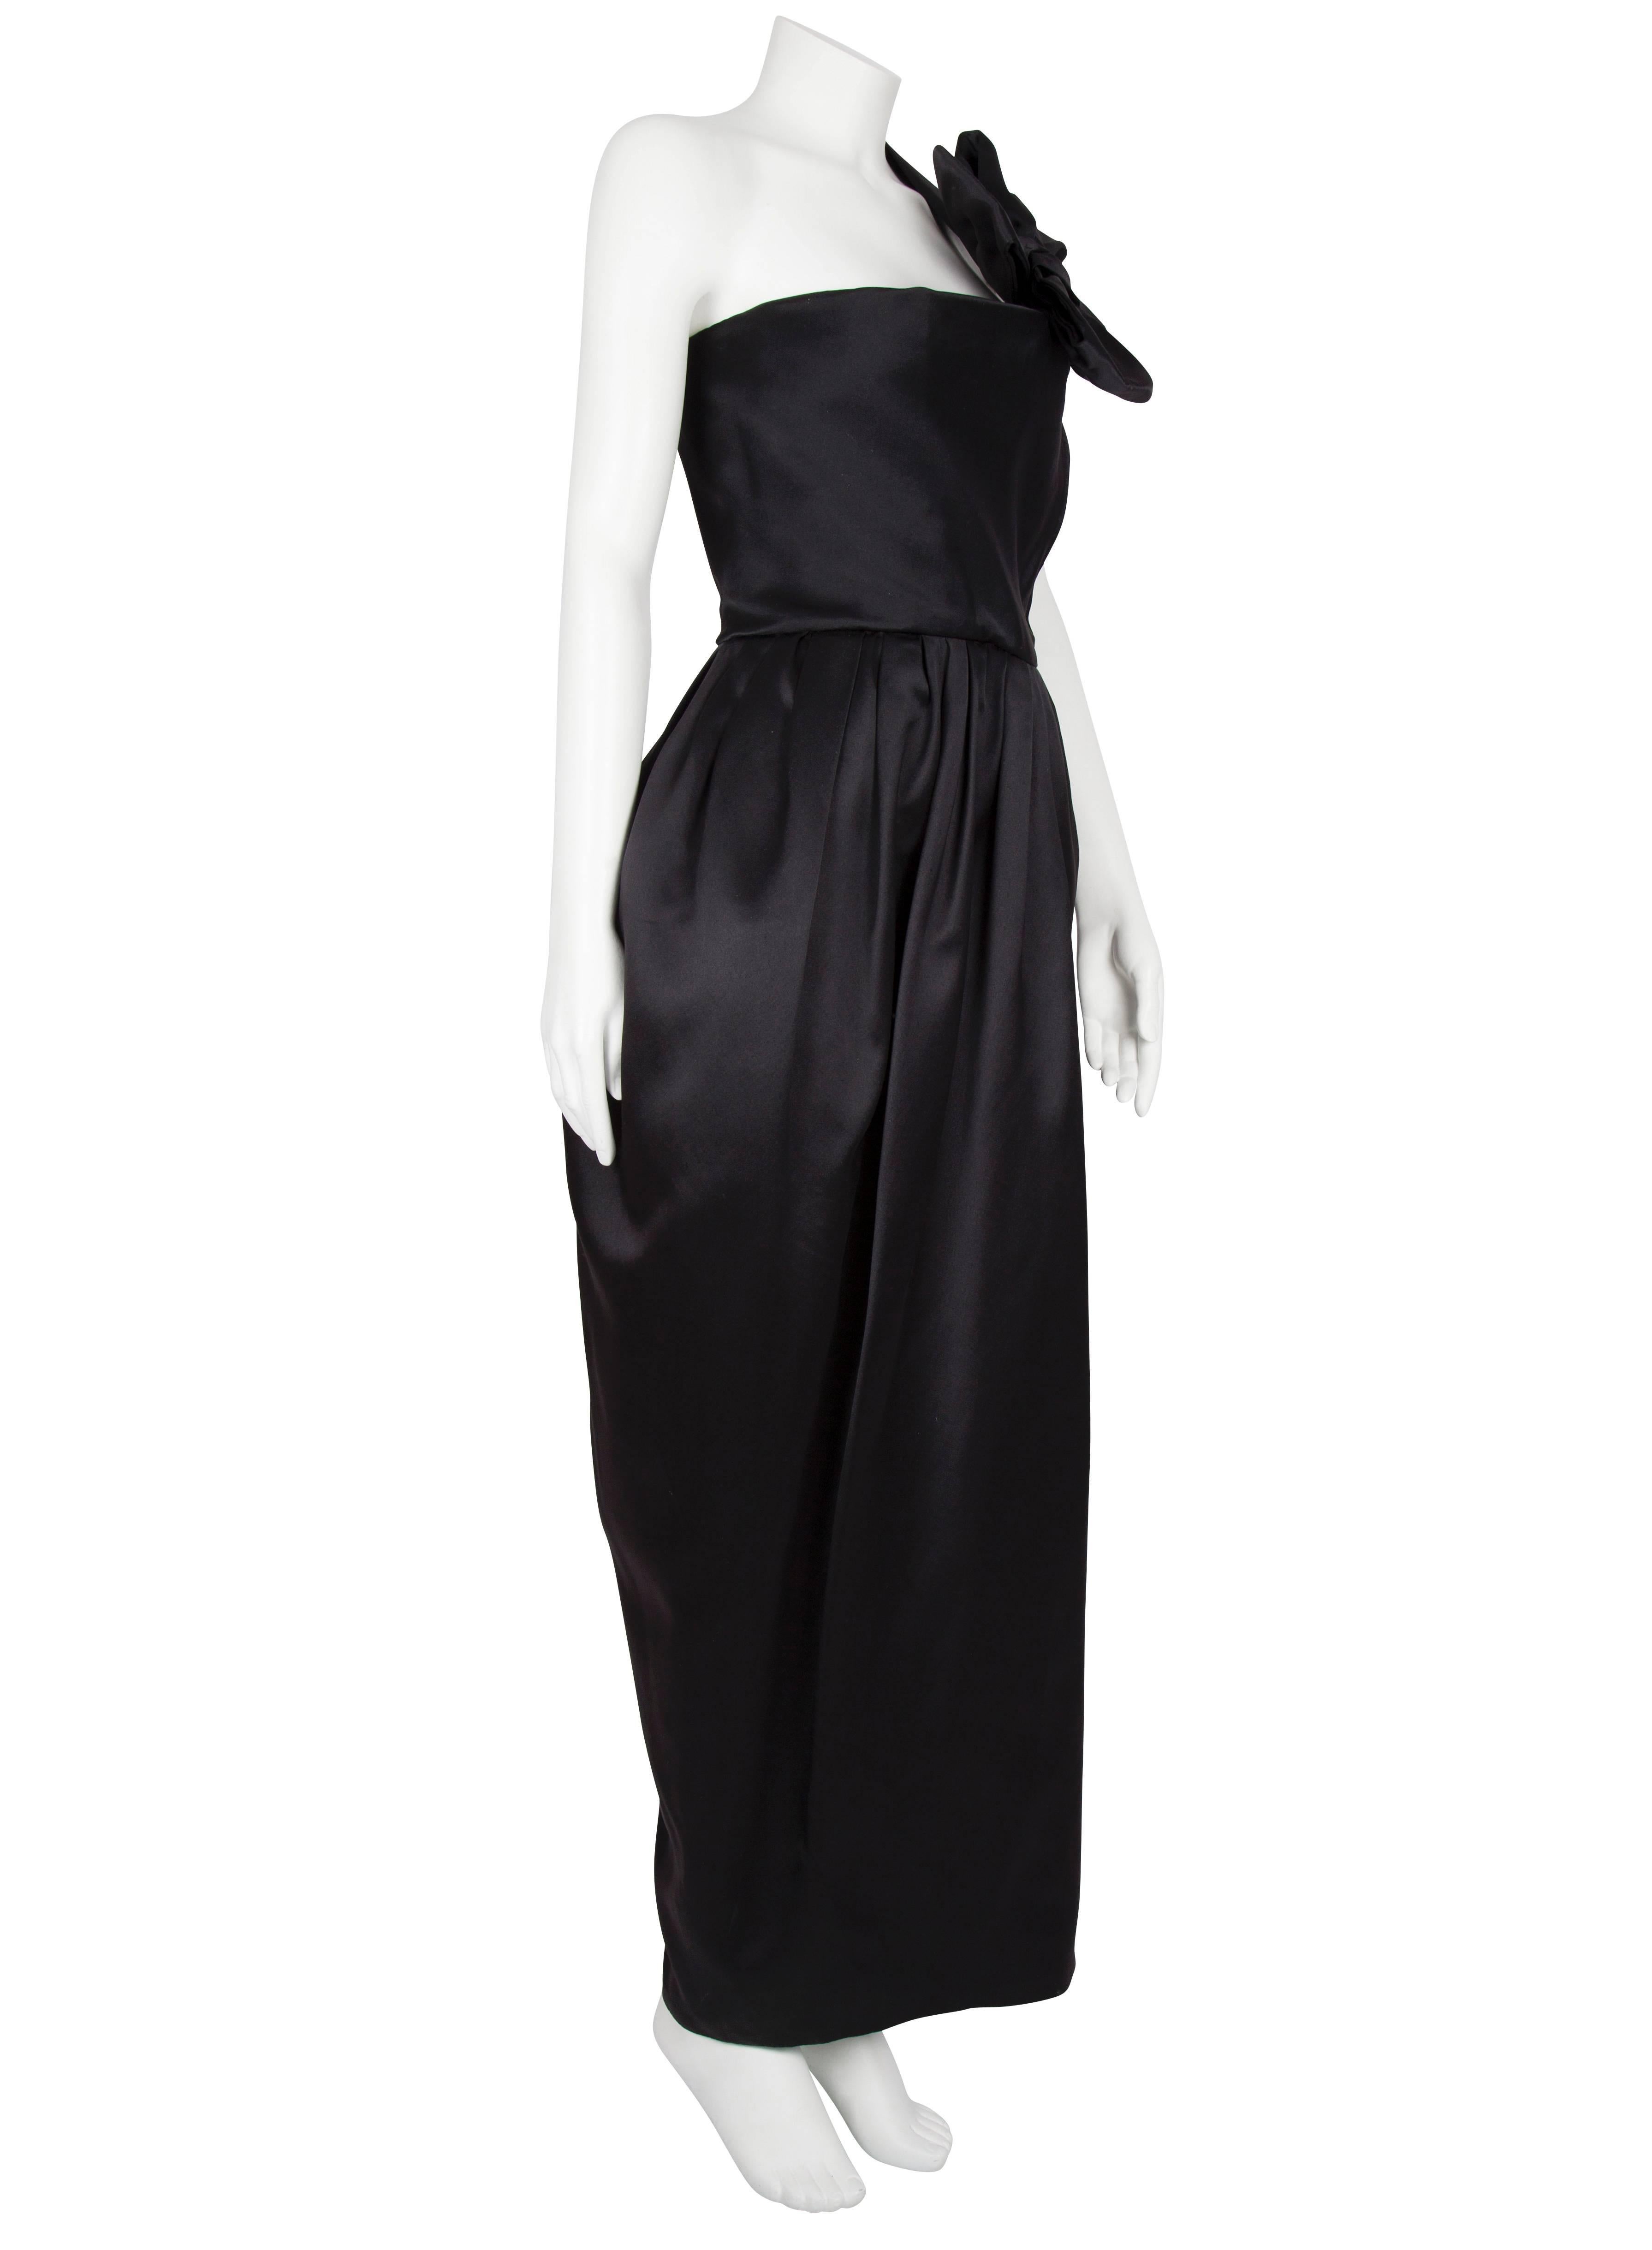 Black A/W 1979 Dior Couture Silk Satin One Shoulder & Dramatic Bow Tulip Skirt Gown  For Sale